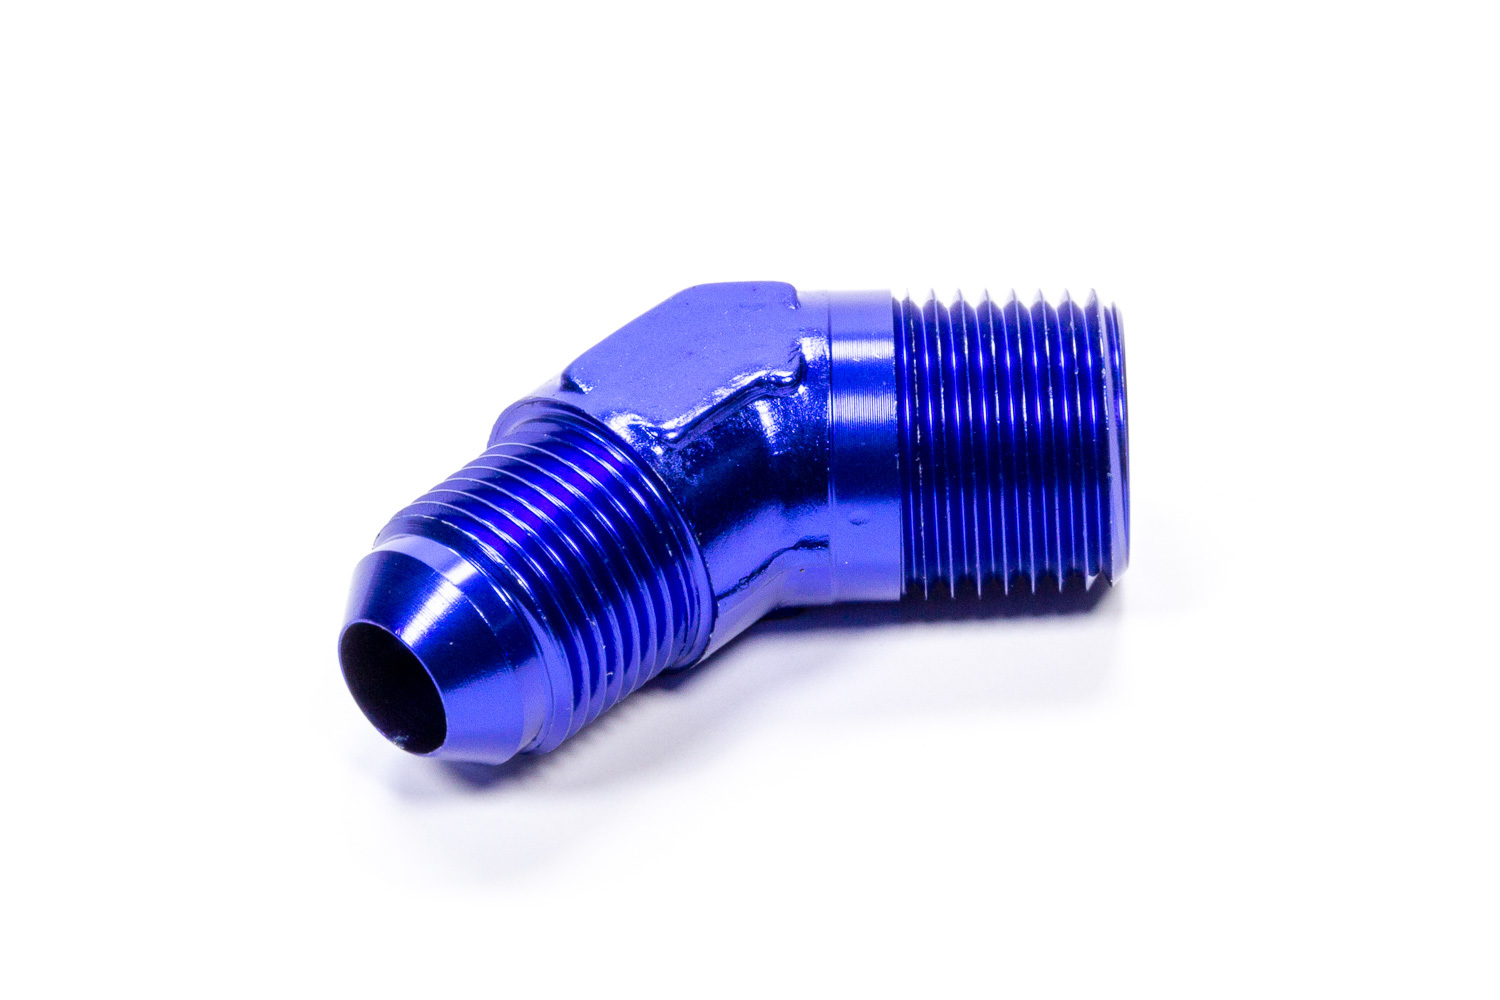 Fragola 482388 Fitting, Adapter, 45 Degree, 8 AN Male to 1/2 in NPT Male, Aluminum, Blue Anodized, Each